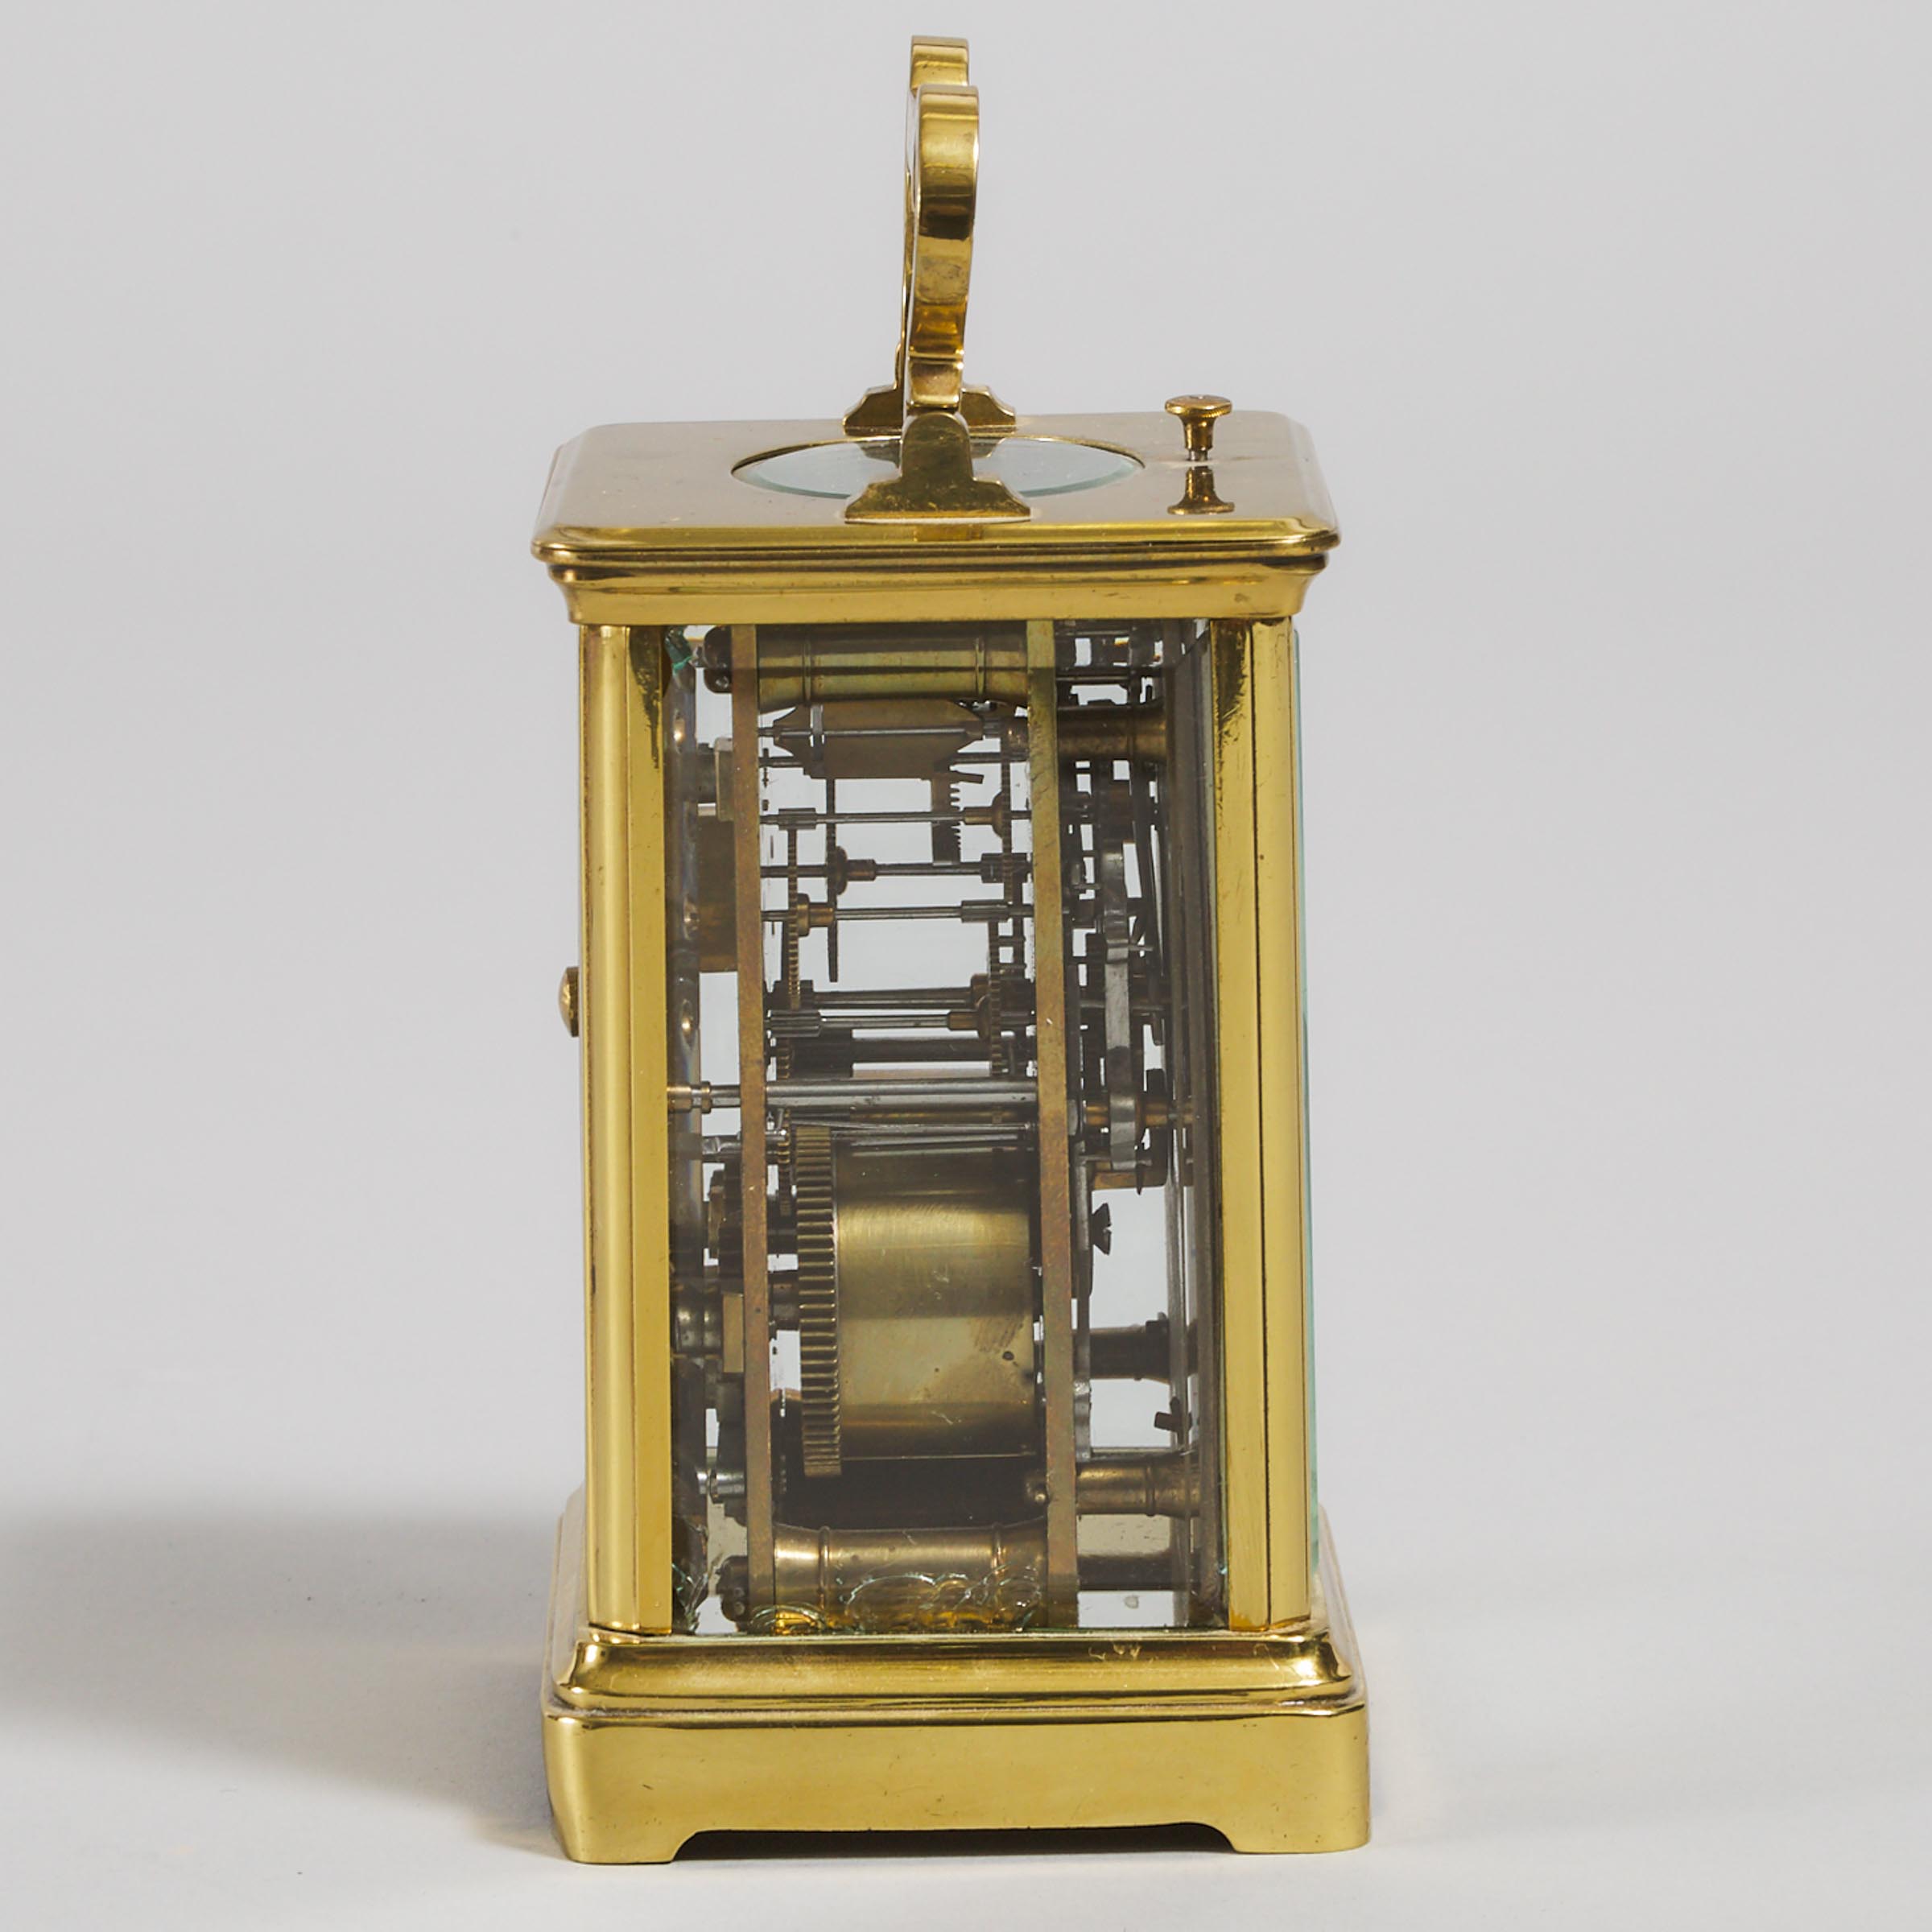 French Striking and Repeating Carriage Clock, c.1900